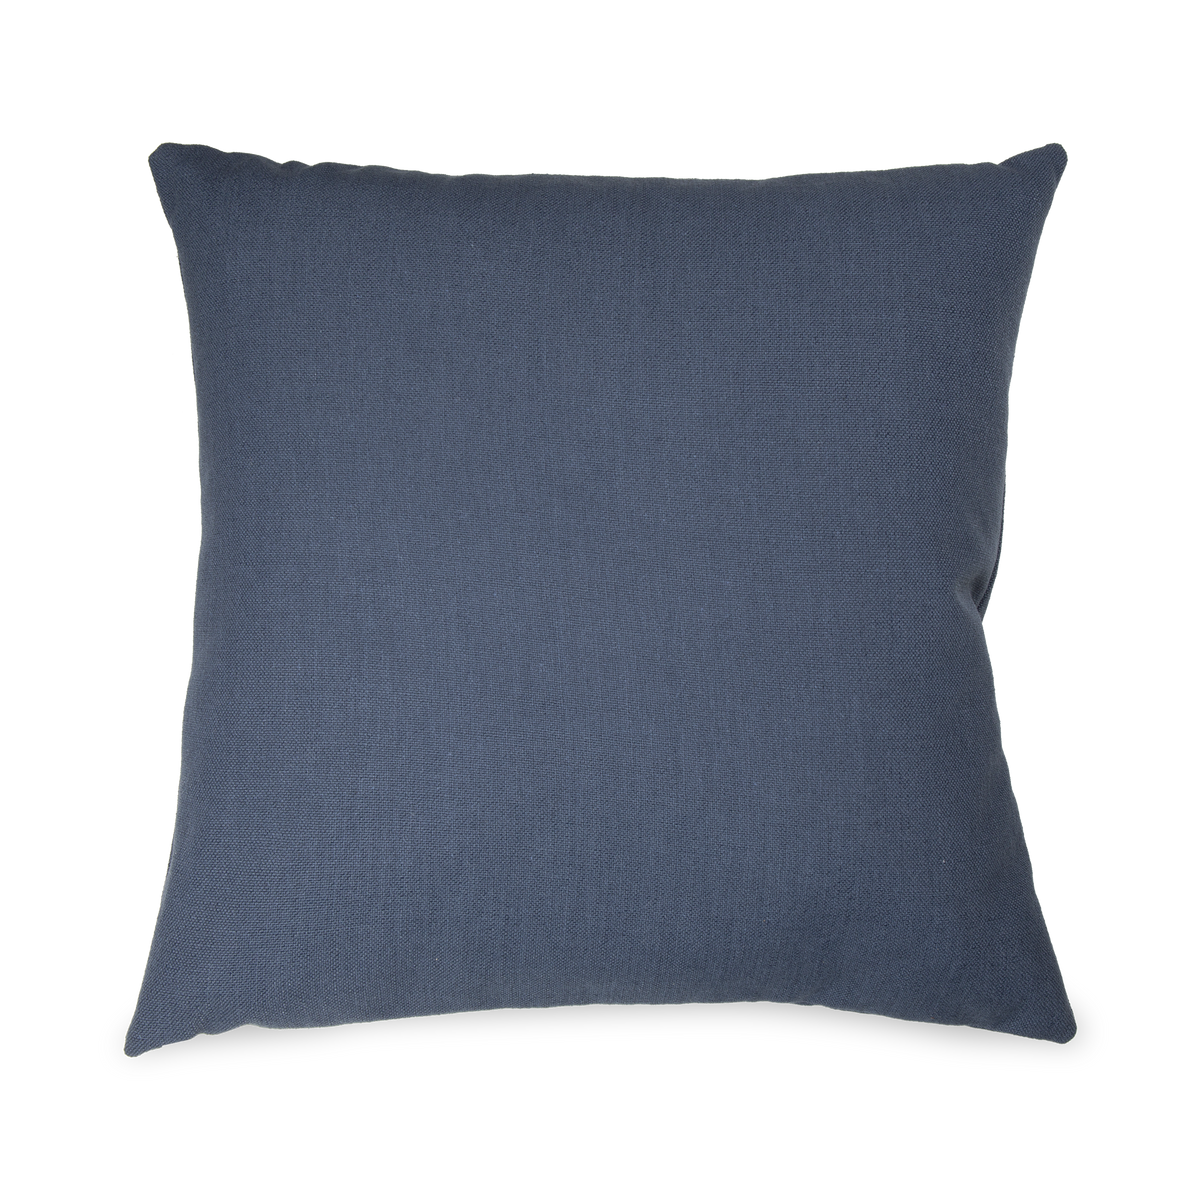 Simple and clean, this throw pillow is made from 100% pure linen in rich navy colour.